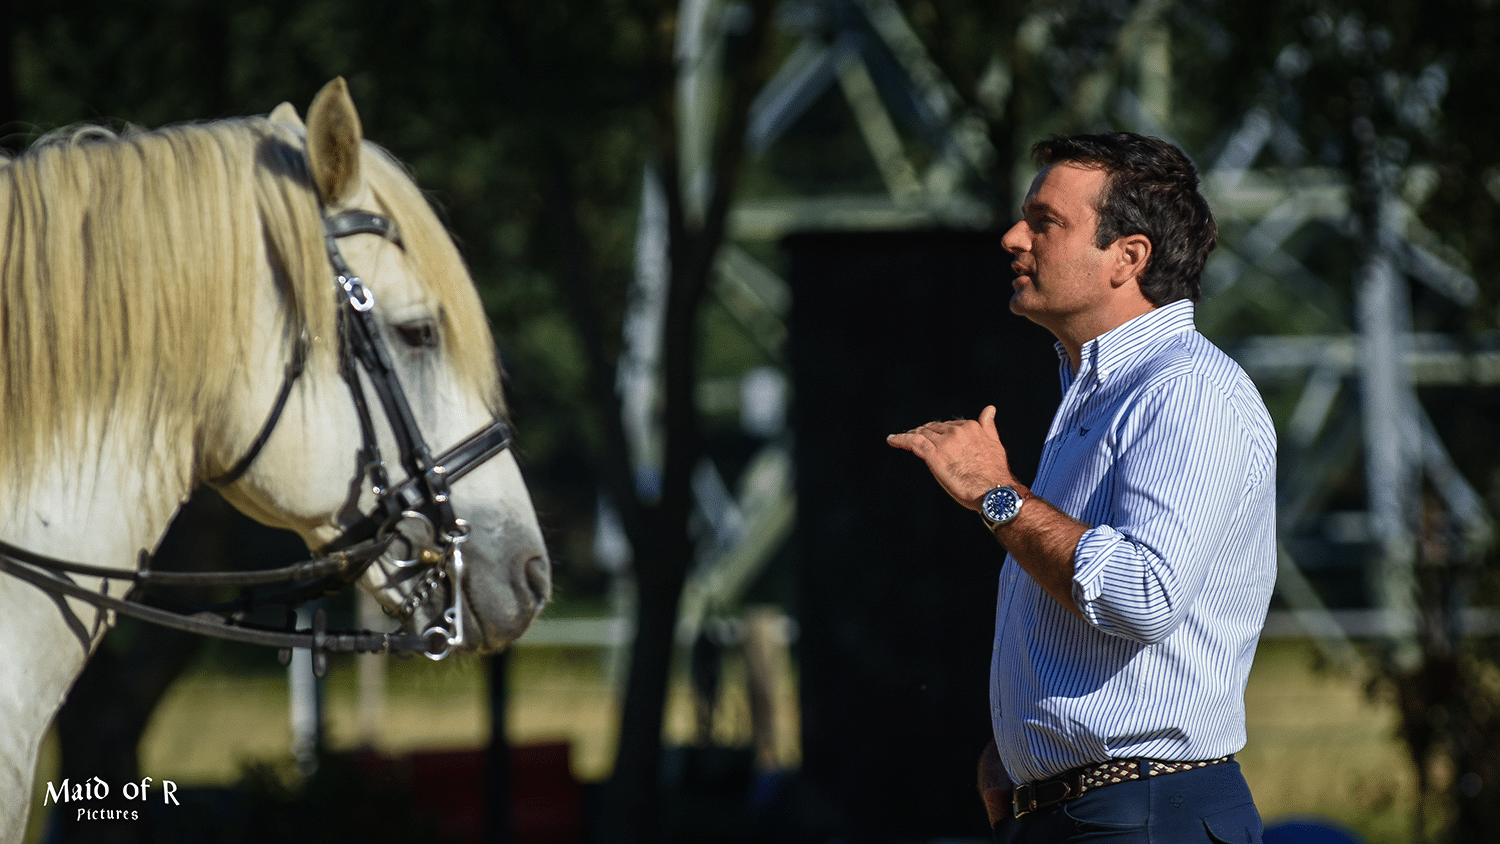 Nuno Avelar dressage and Working Equitation rider and trainer